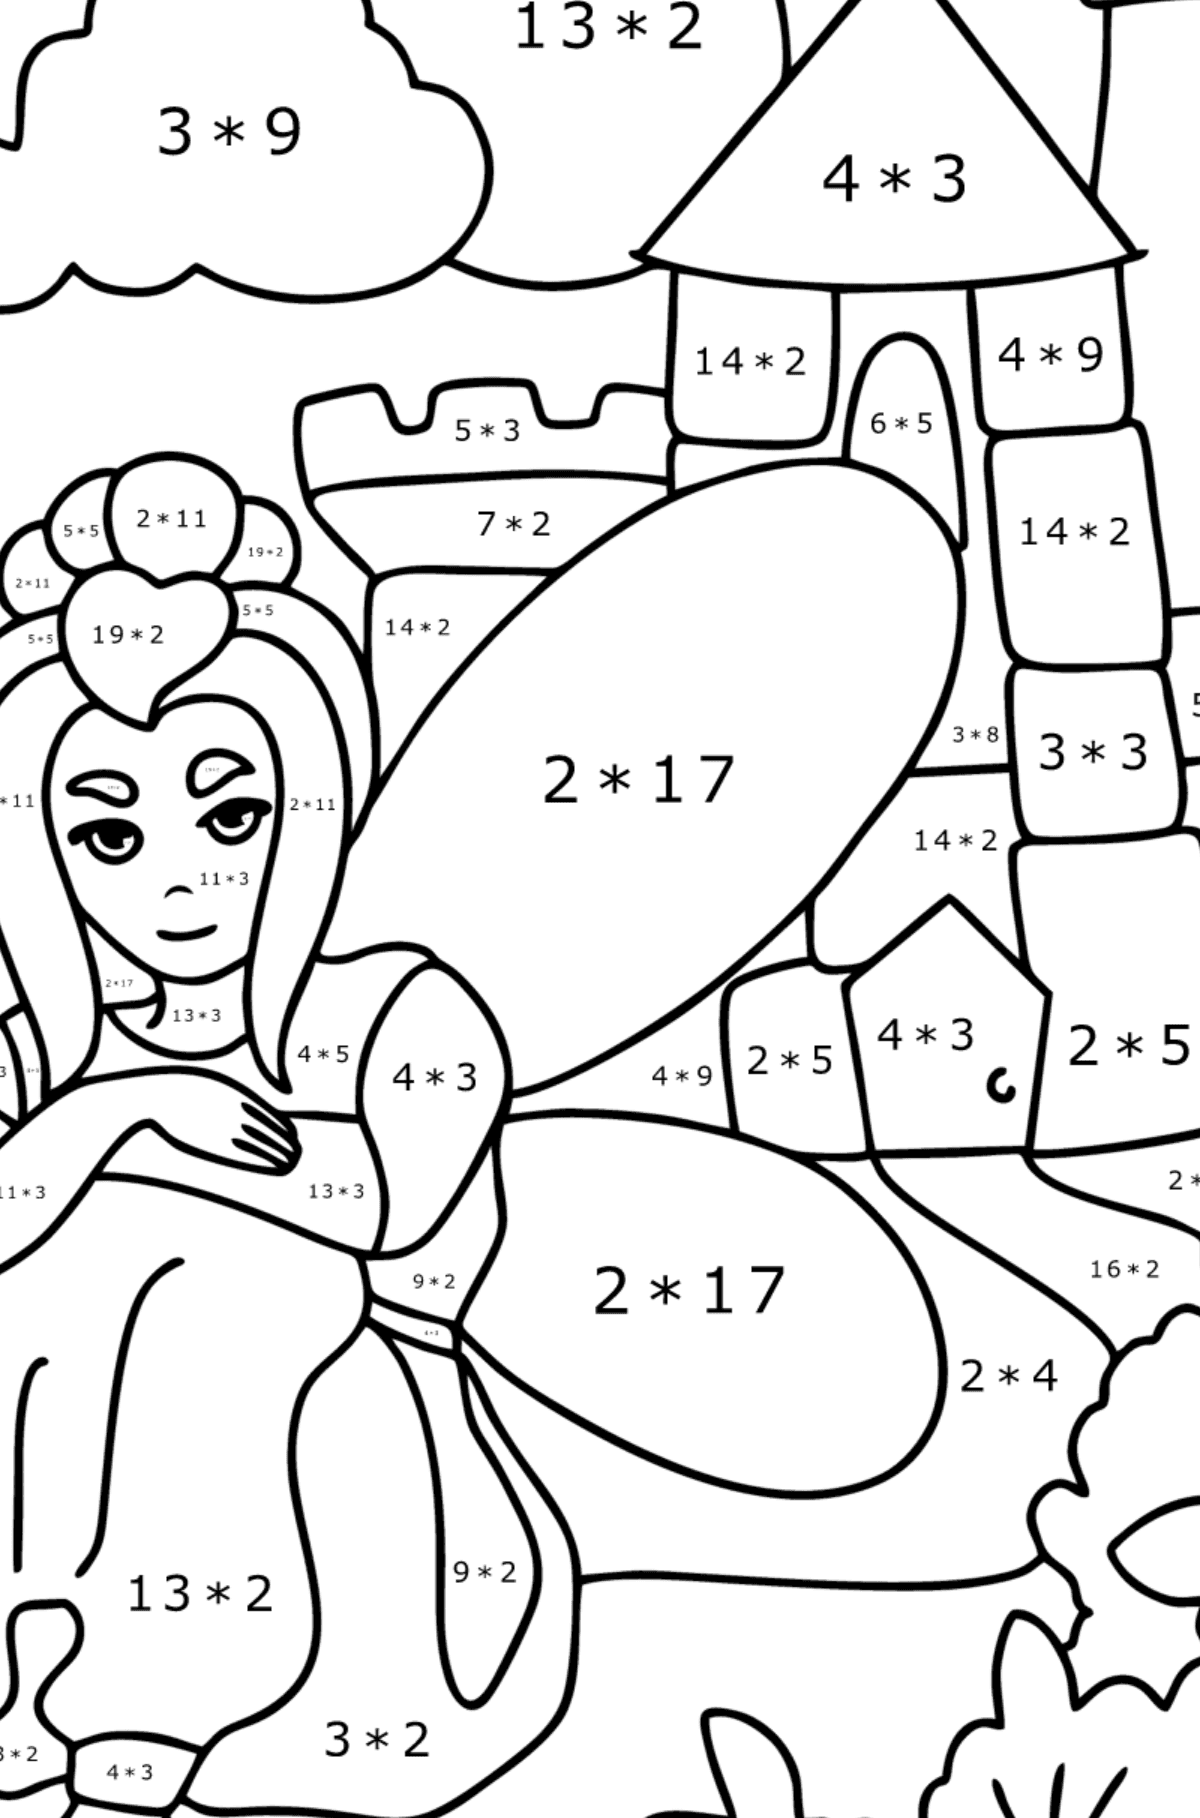 Fairy at the castle coloring page - Math Coloring - Multiplication for Kids